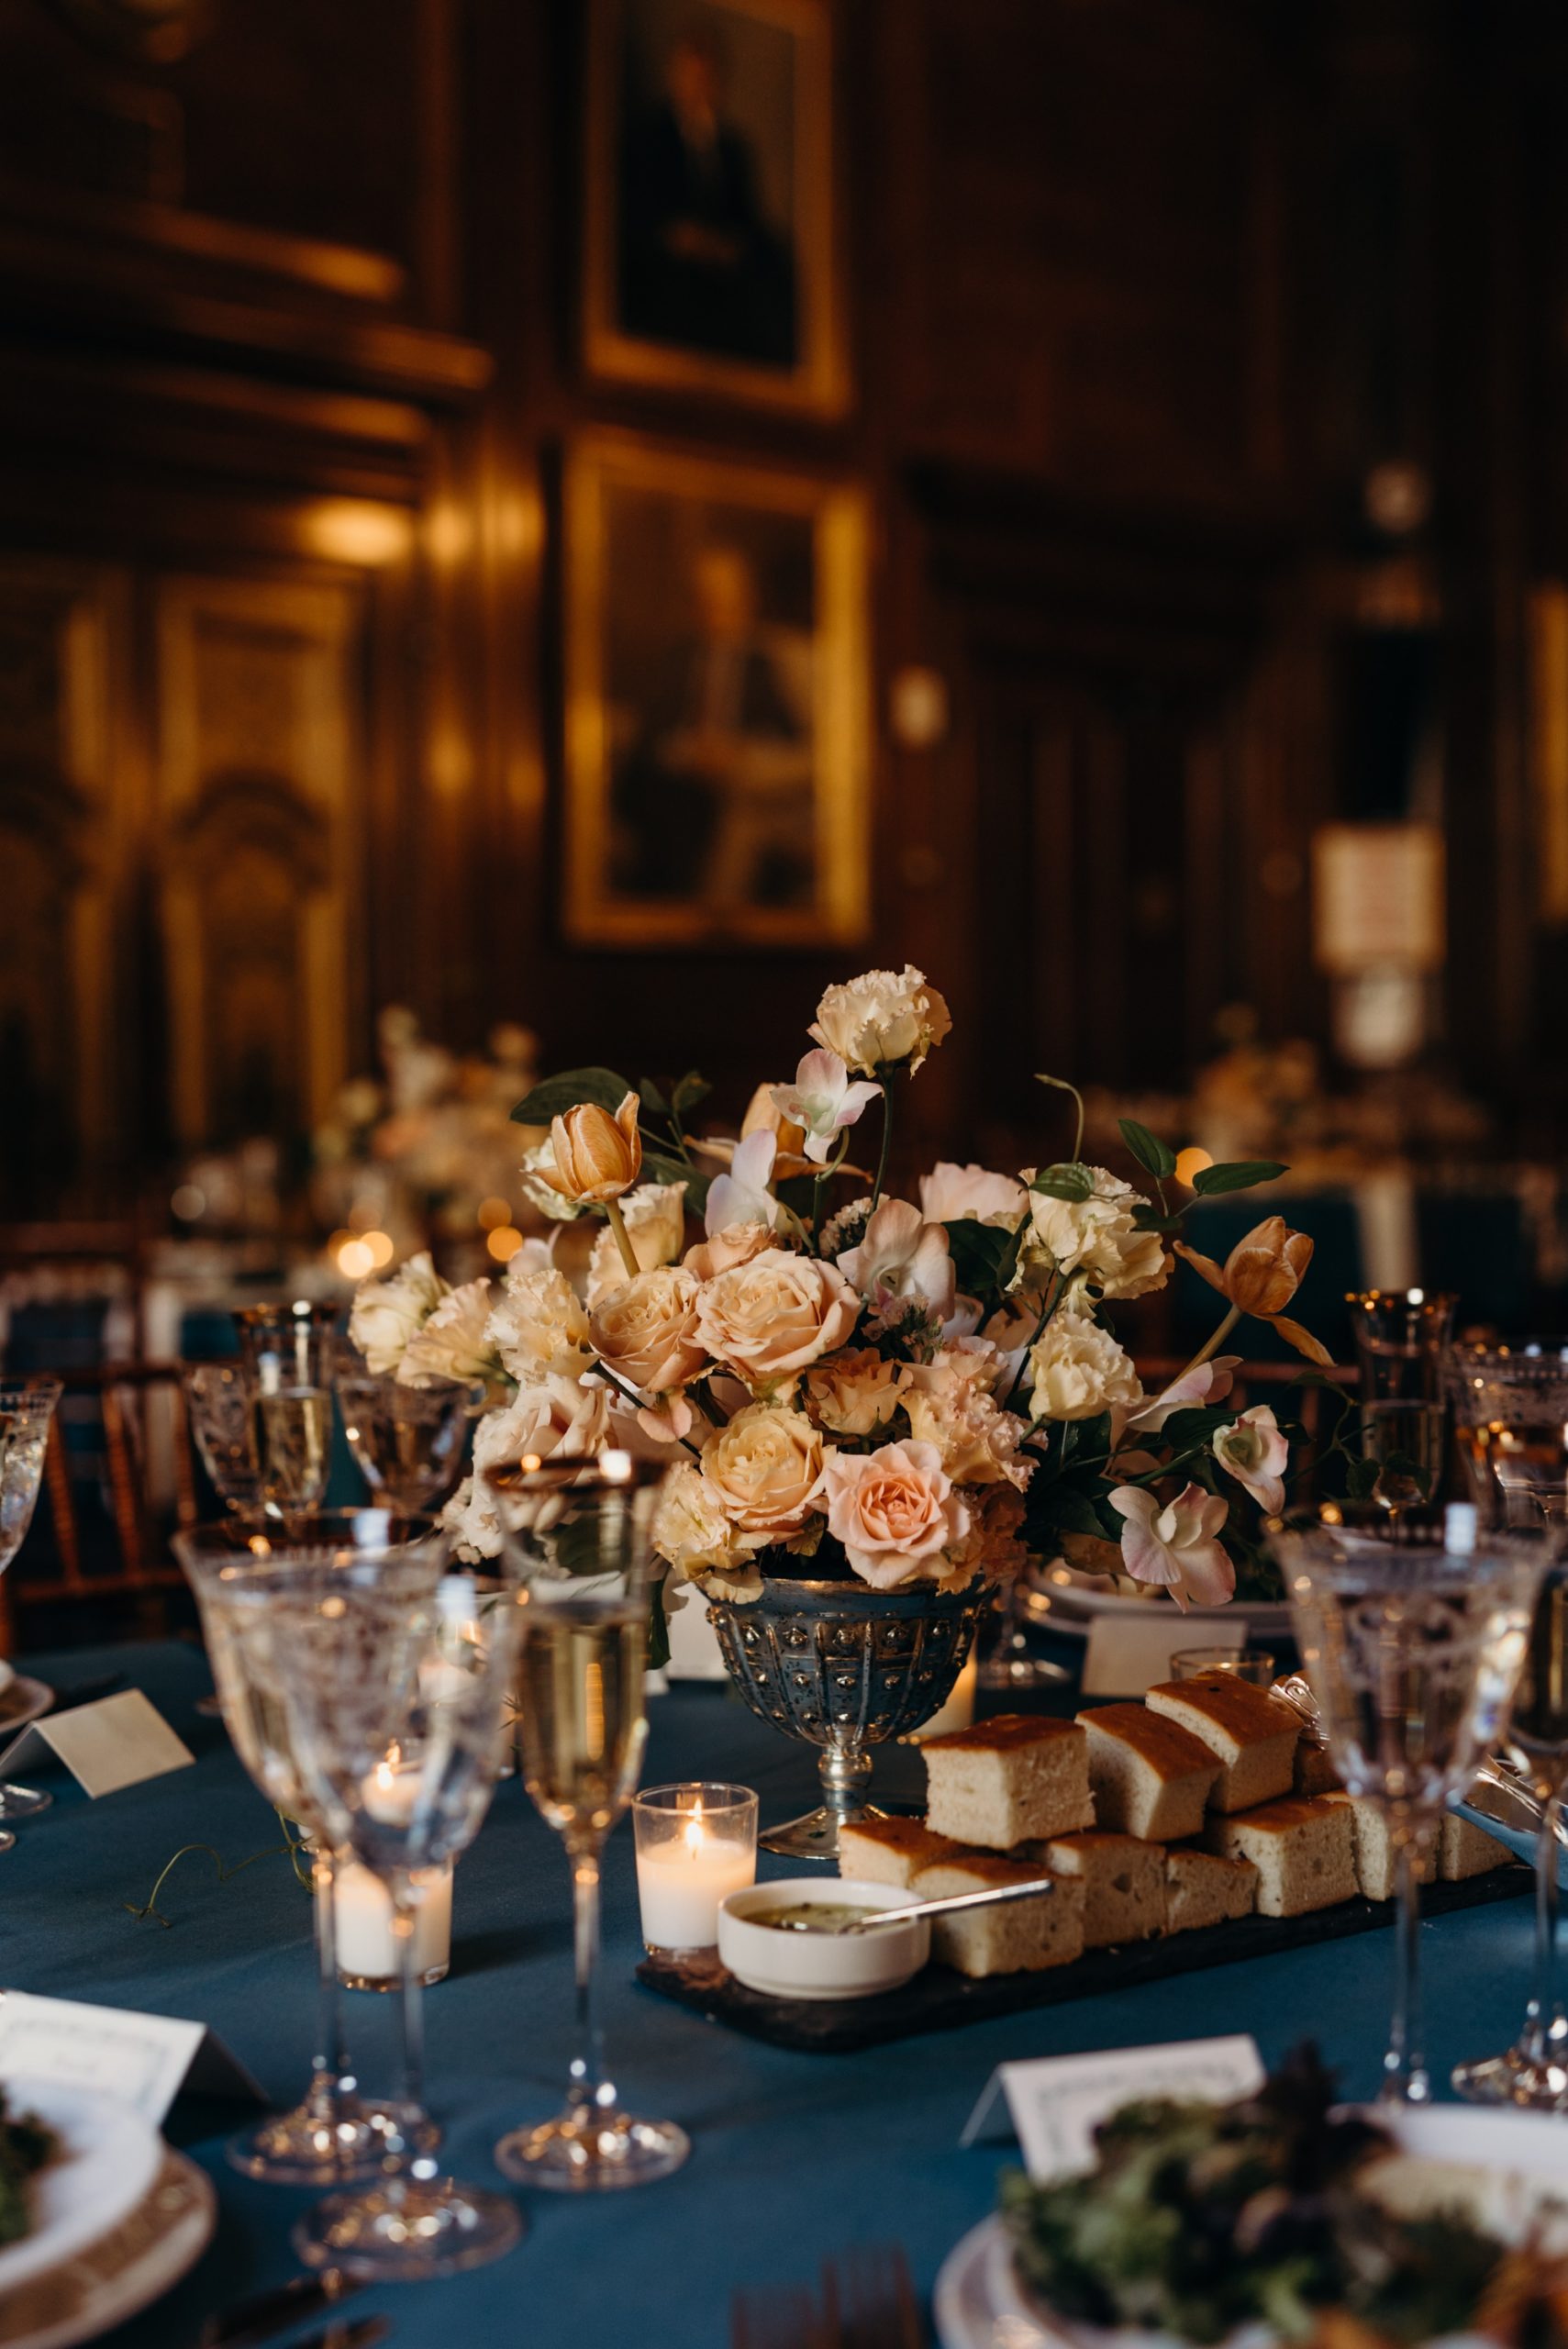 table flower arrangements during a wedding reception at harold pratt house in new york city